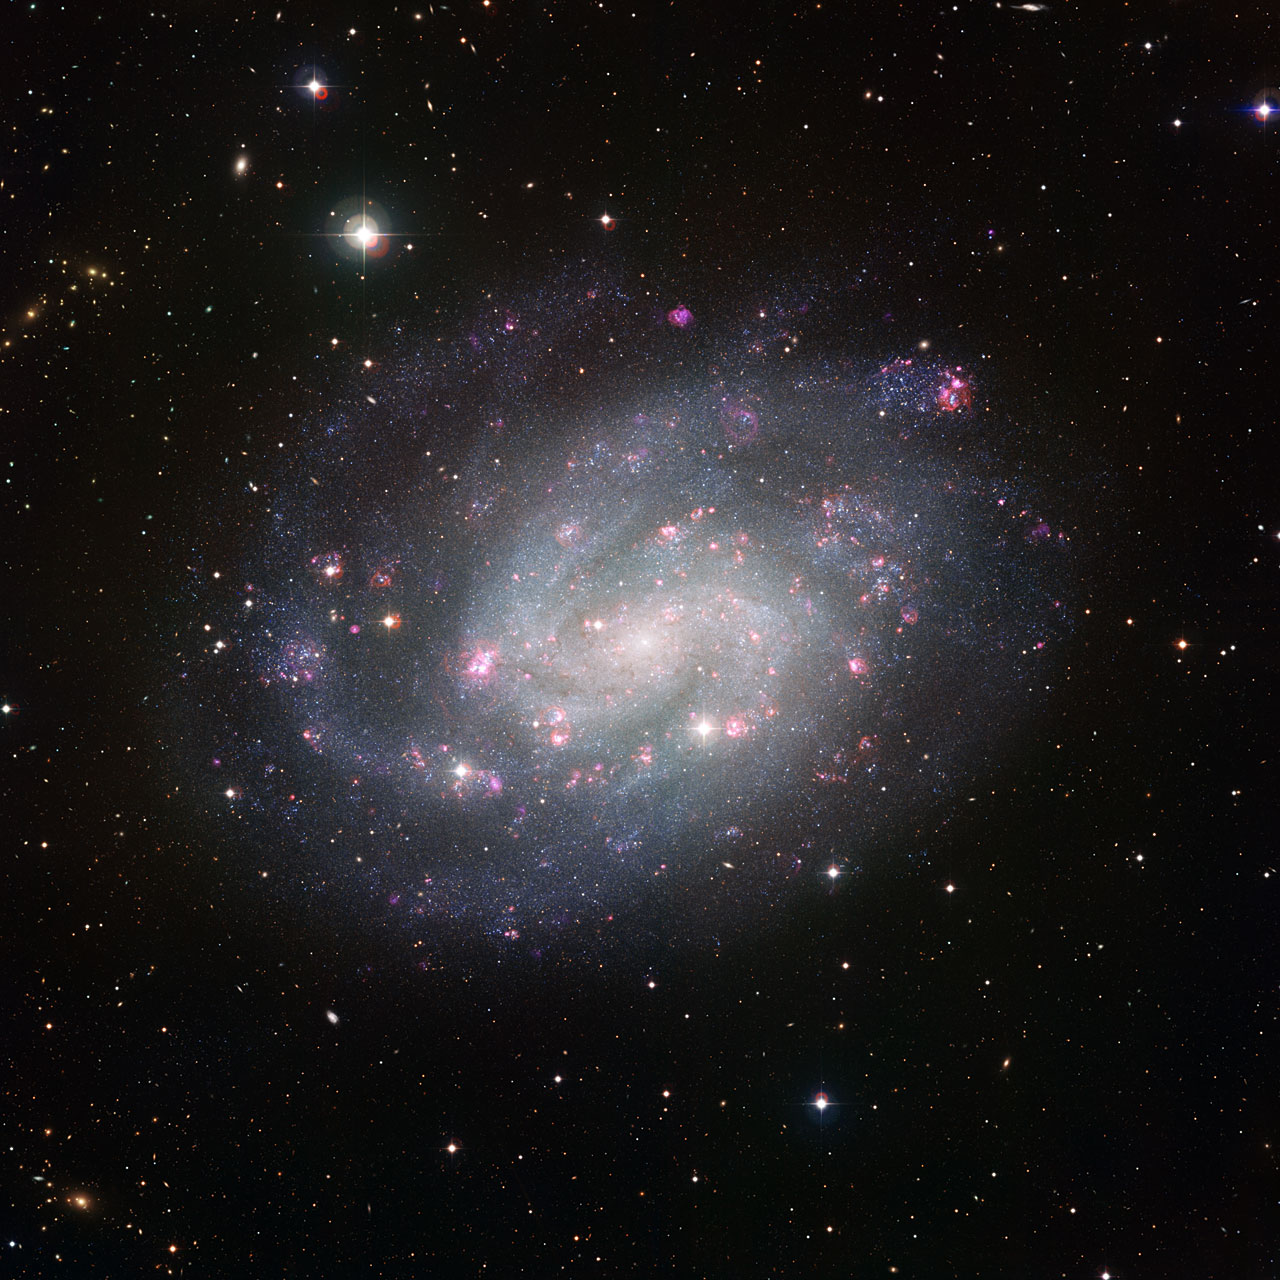 NGC 300 using the Wide Field Imager